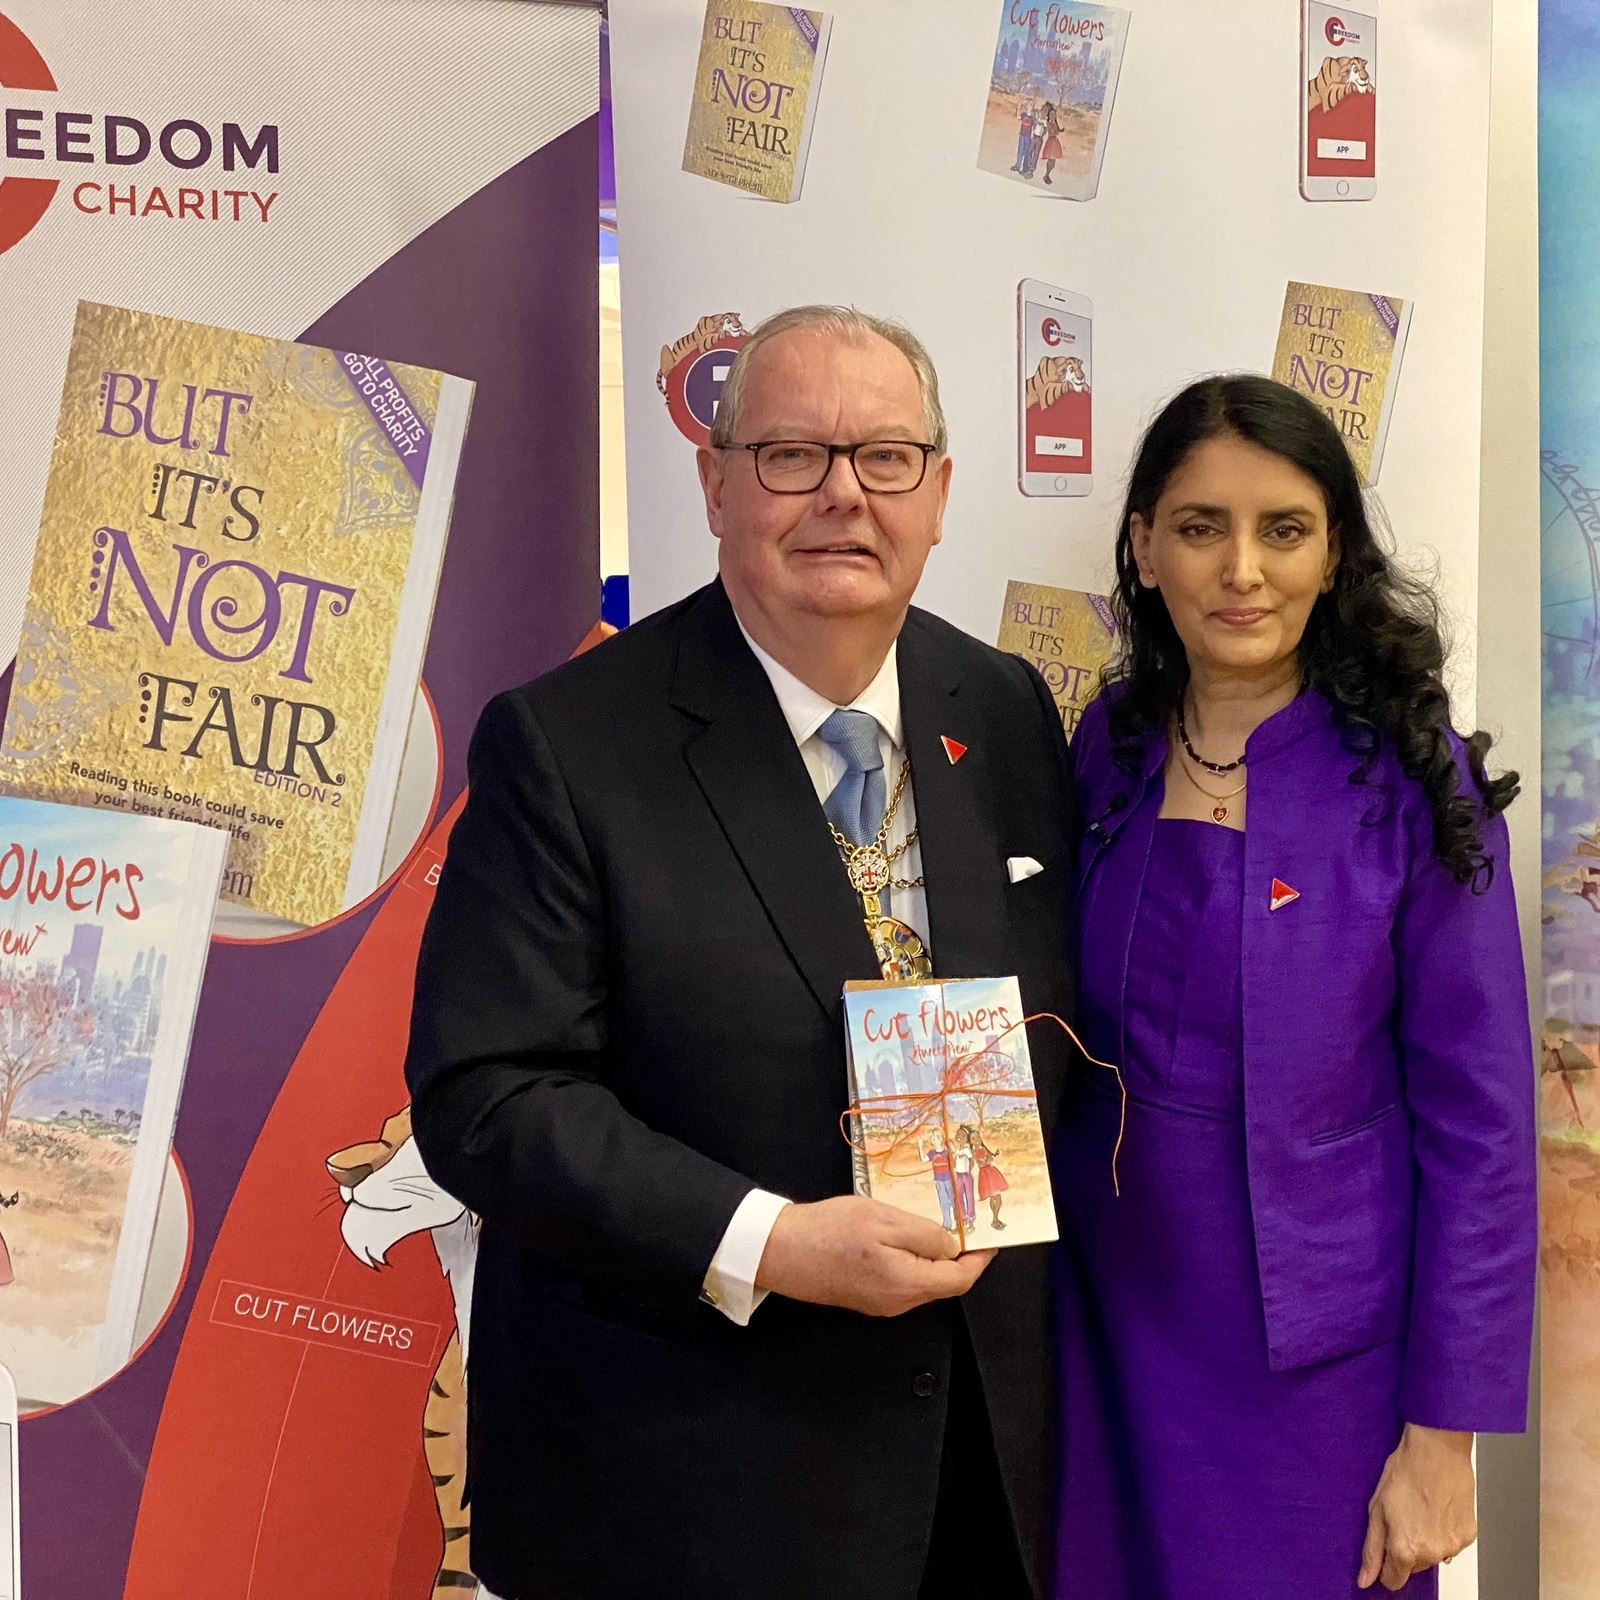 4 Apr 23 - I was delighted to speak in support of Freedom, the charity established by Aneeta Prem MBE, who seek to support survivors, raise awareness, and educate society about dishonour abuse. 